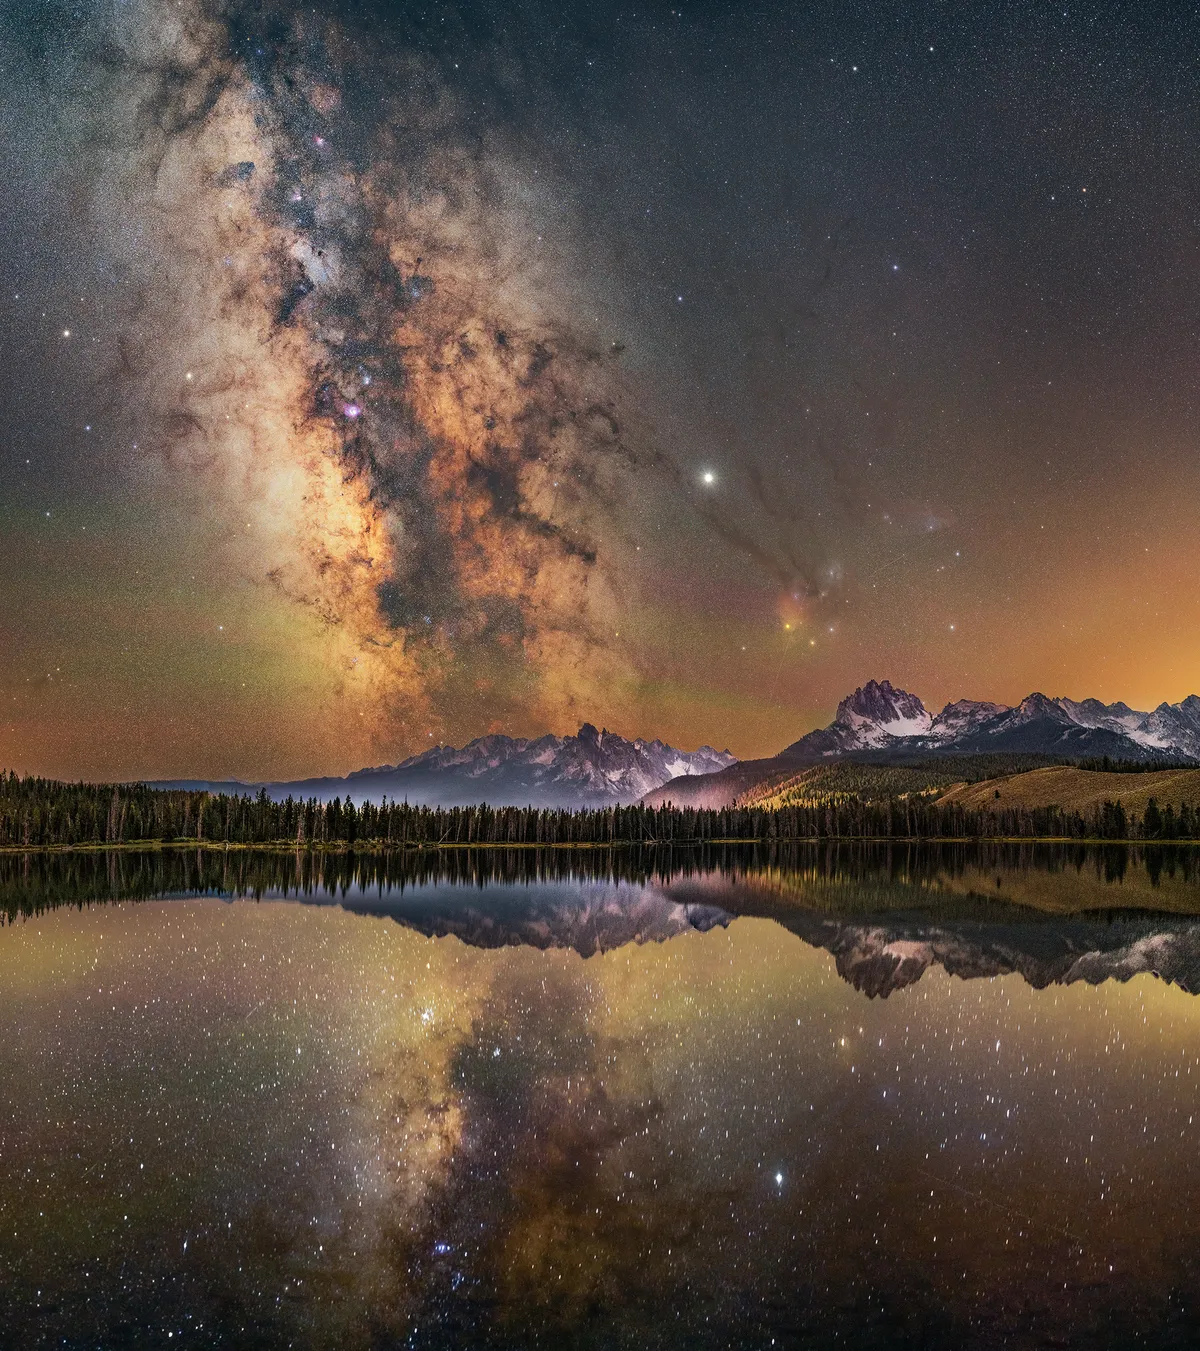 The Red Lake of Stars Bryony Richards (USA). Category: Skyscapes. Equipment: Sony a7R III camera, sky: 50 mm f/2 lens, foreground: 50mm f/1.4 lens, reflection: 50mm f/1.4 lens.